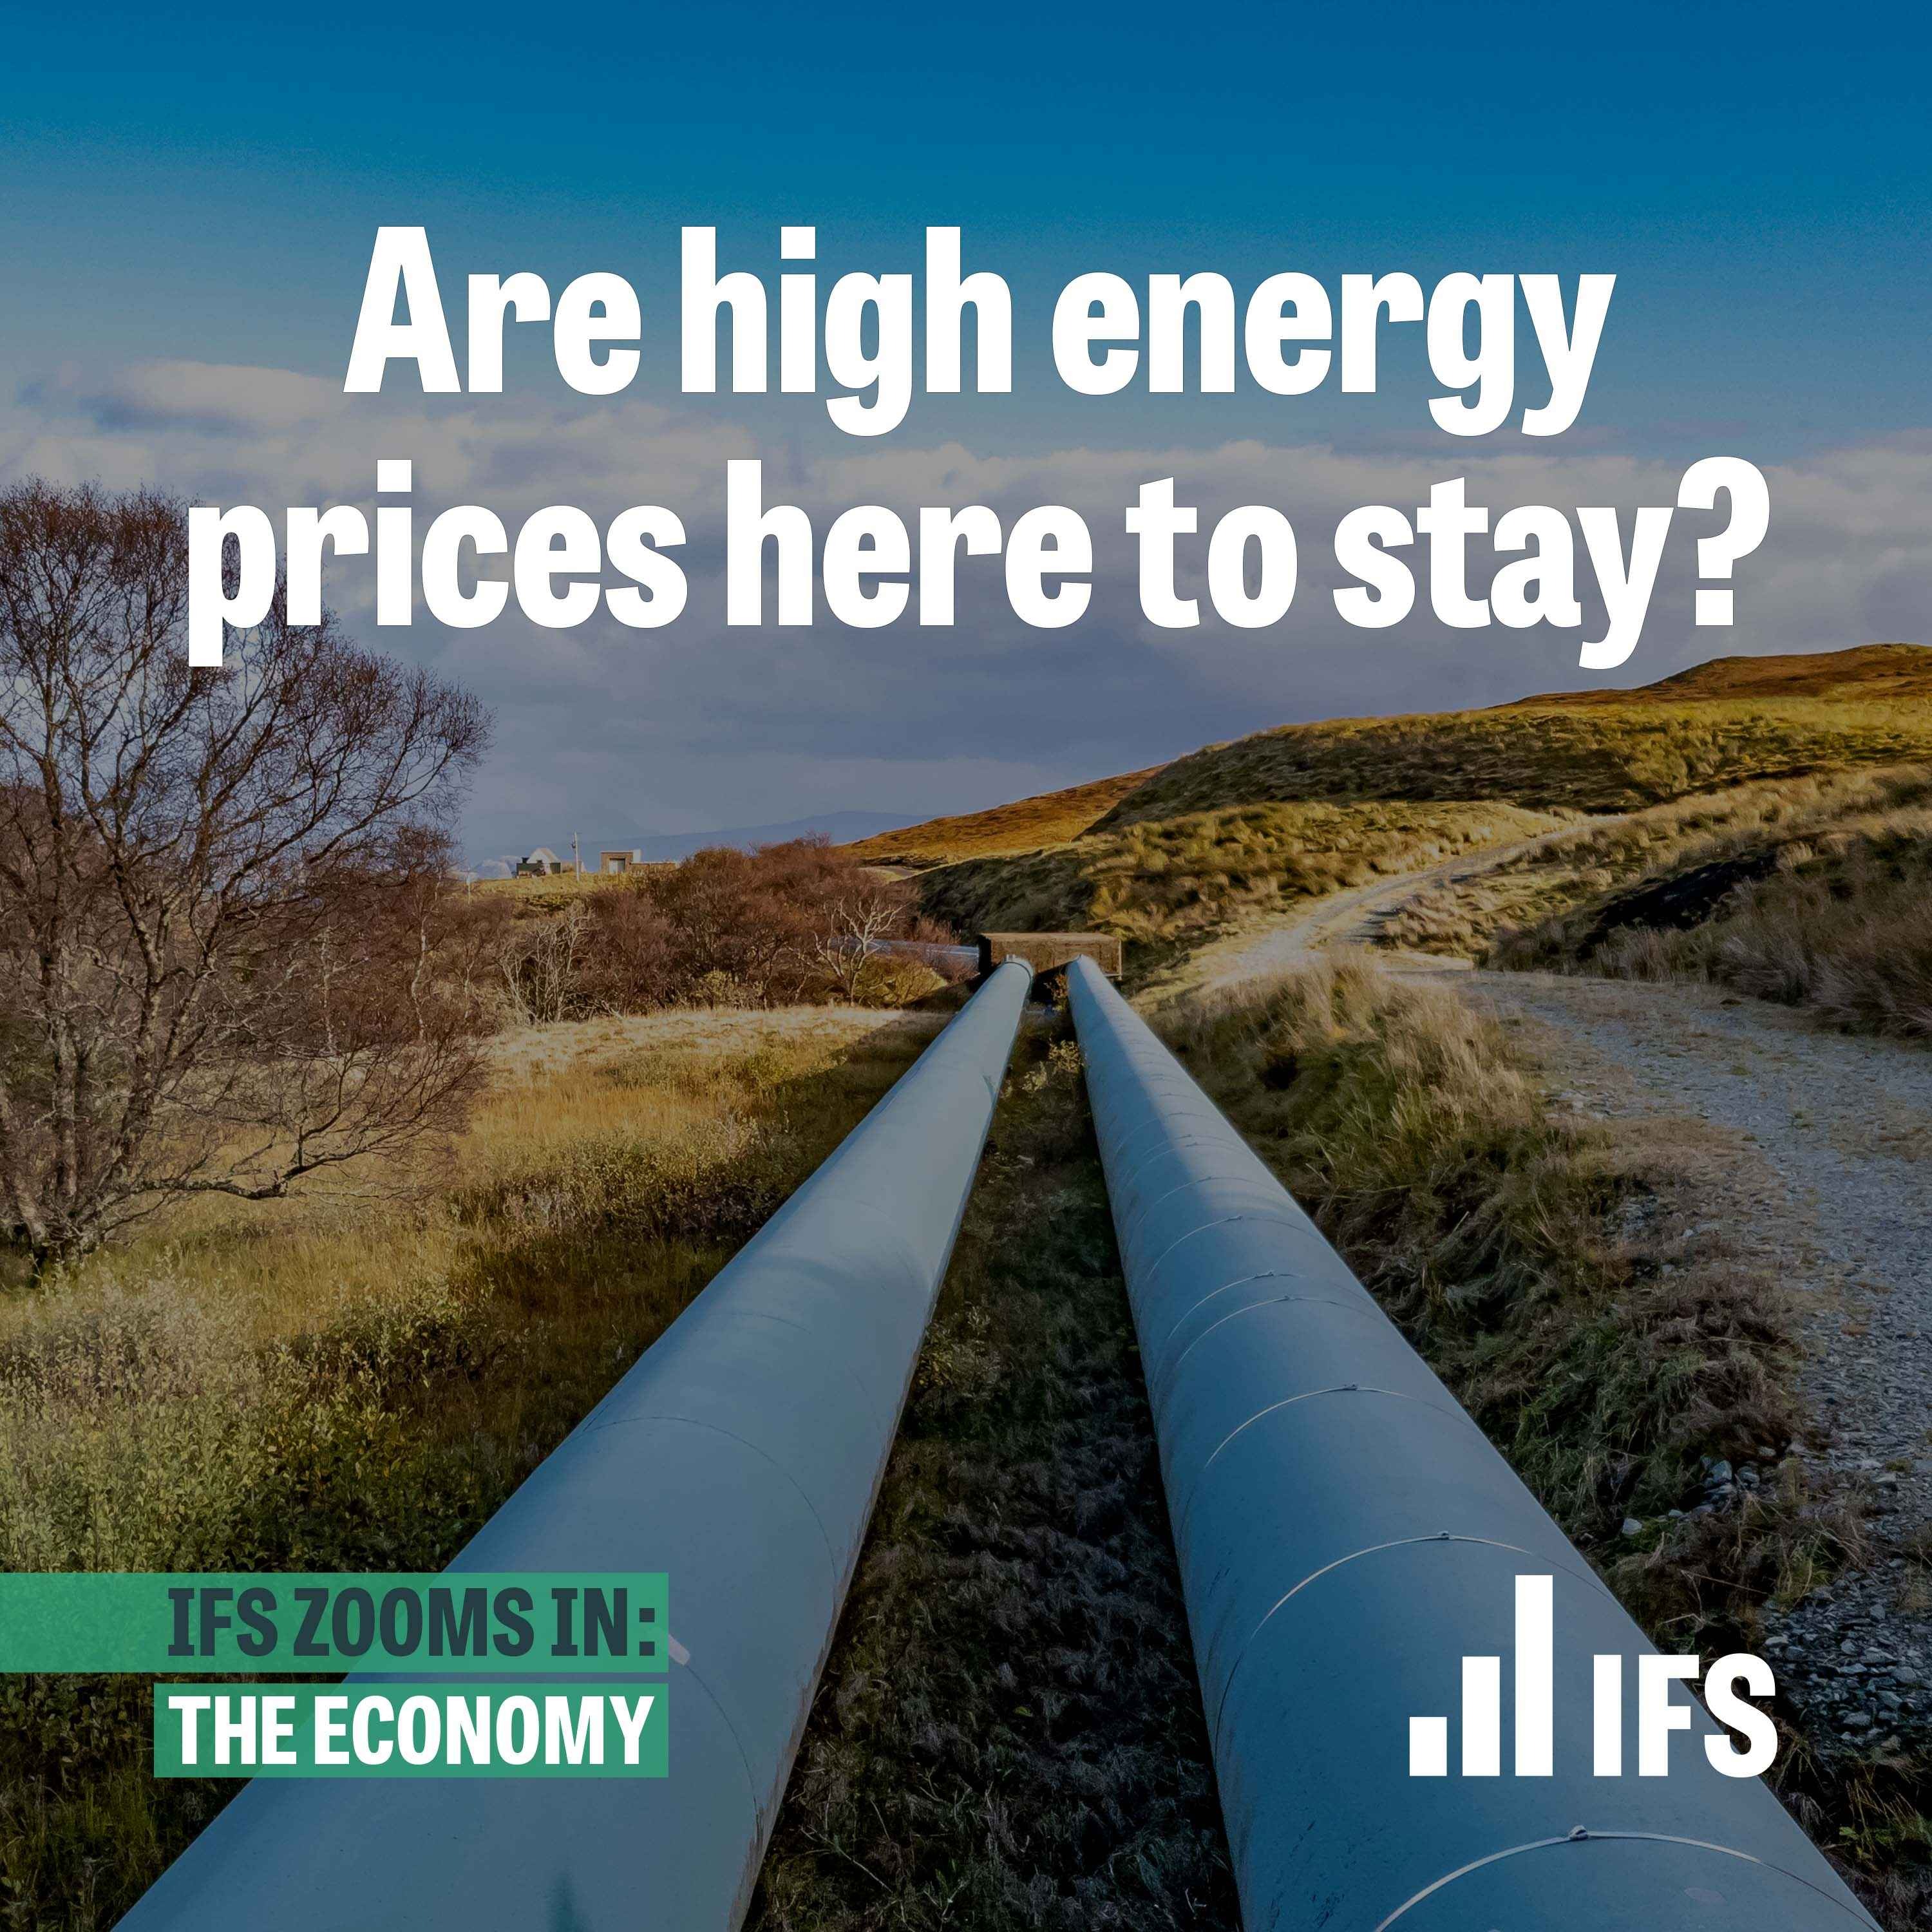 Are high energy prices here to stay?